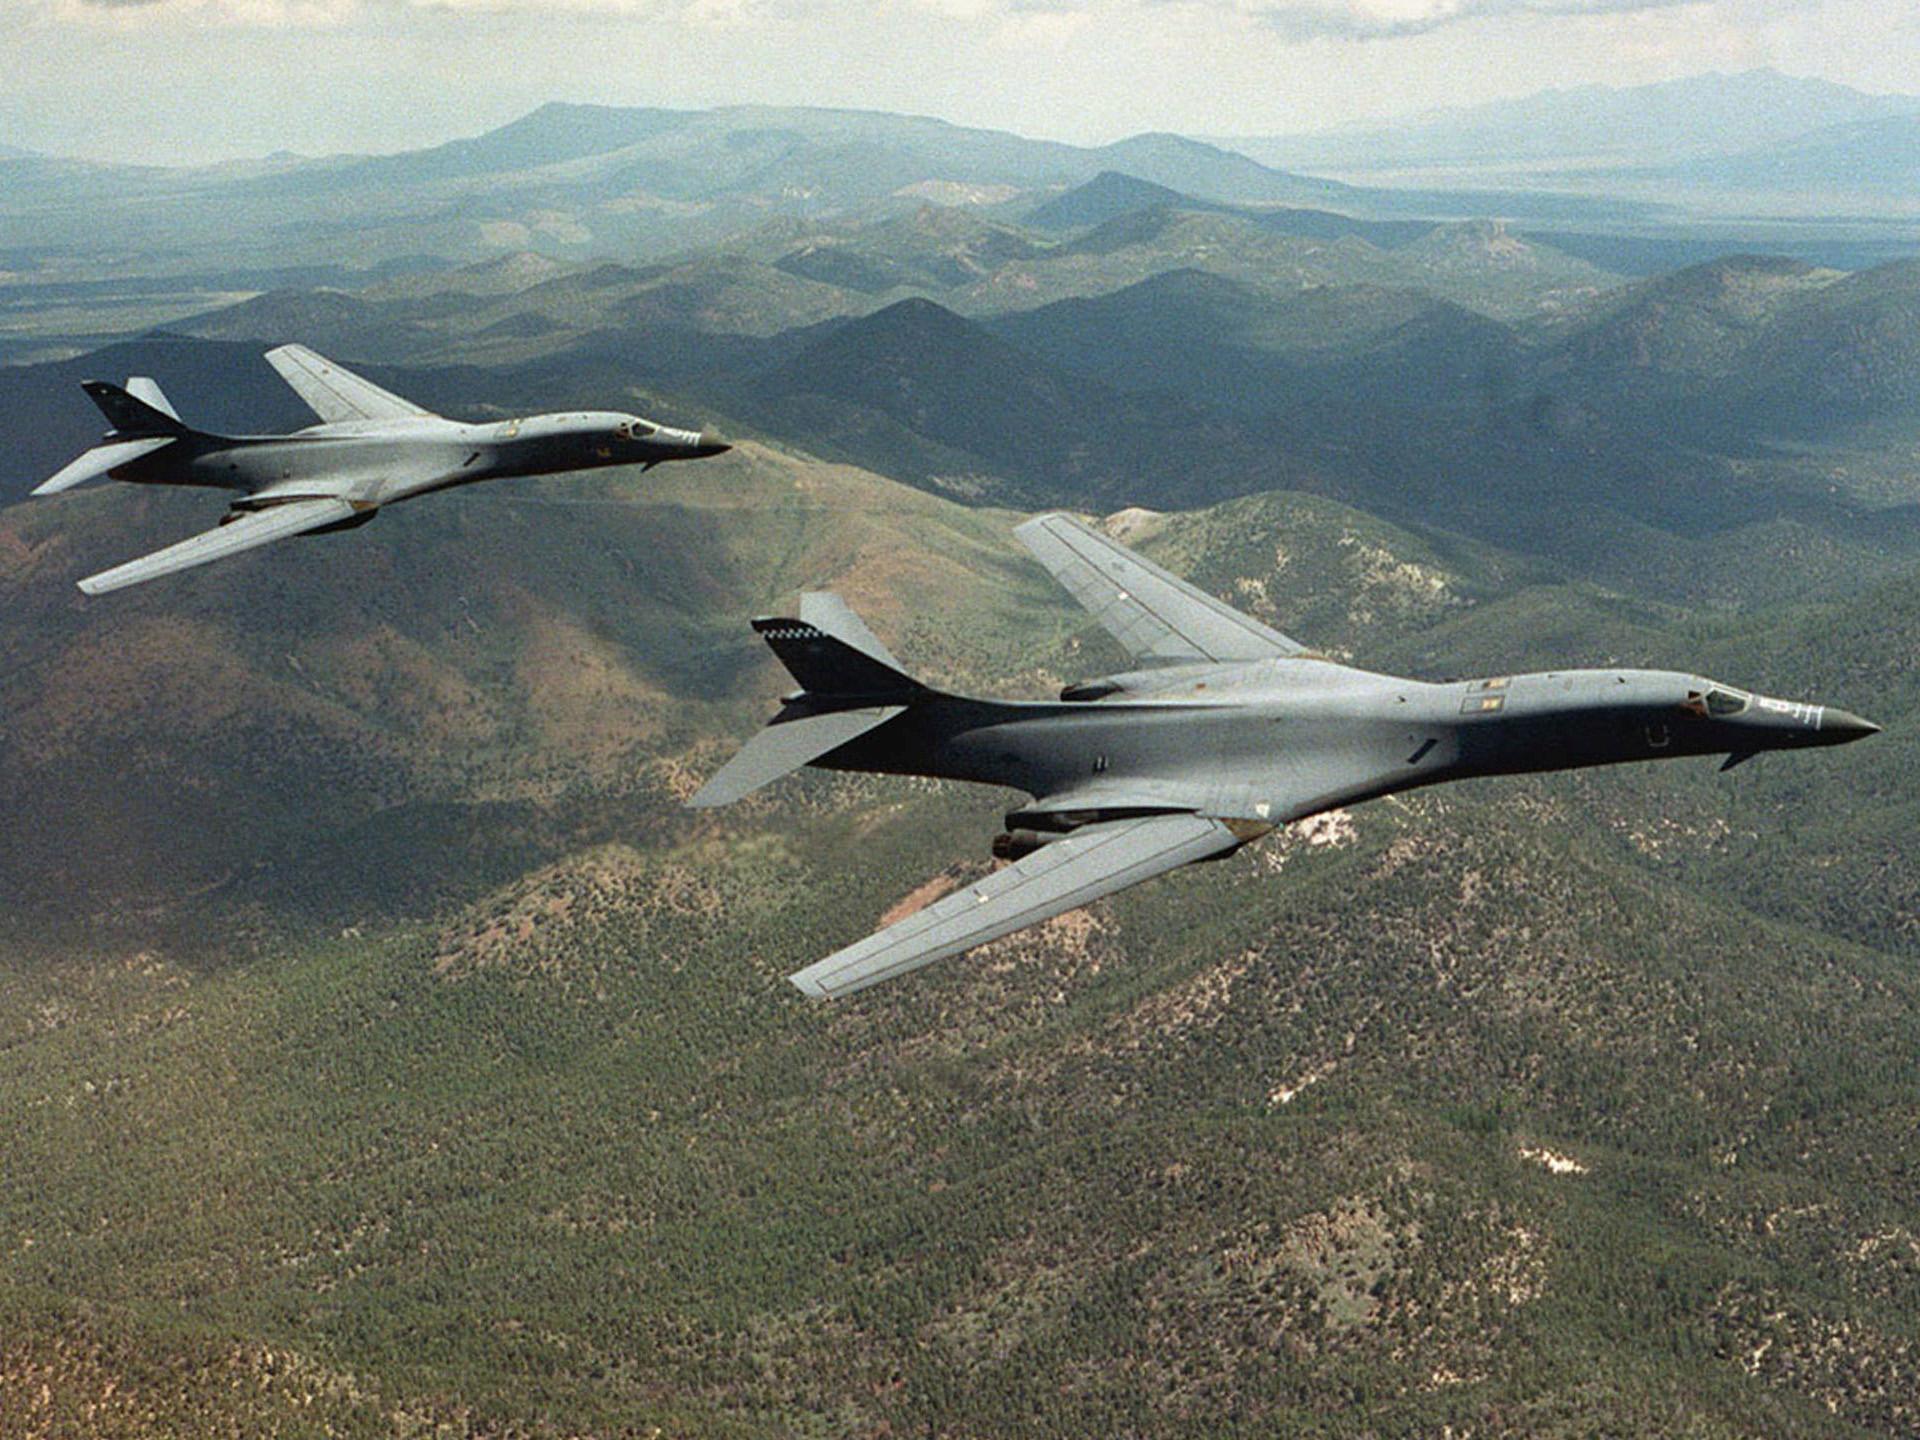 A pair of B-1B Lancer bombers soar over open country